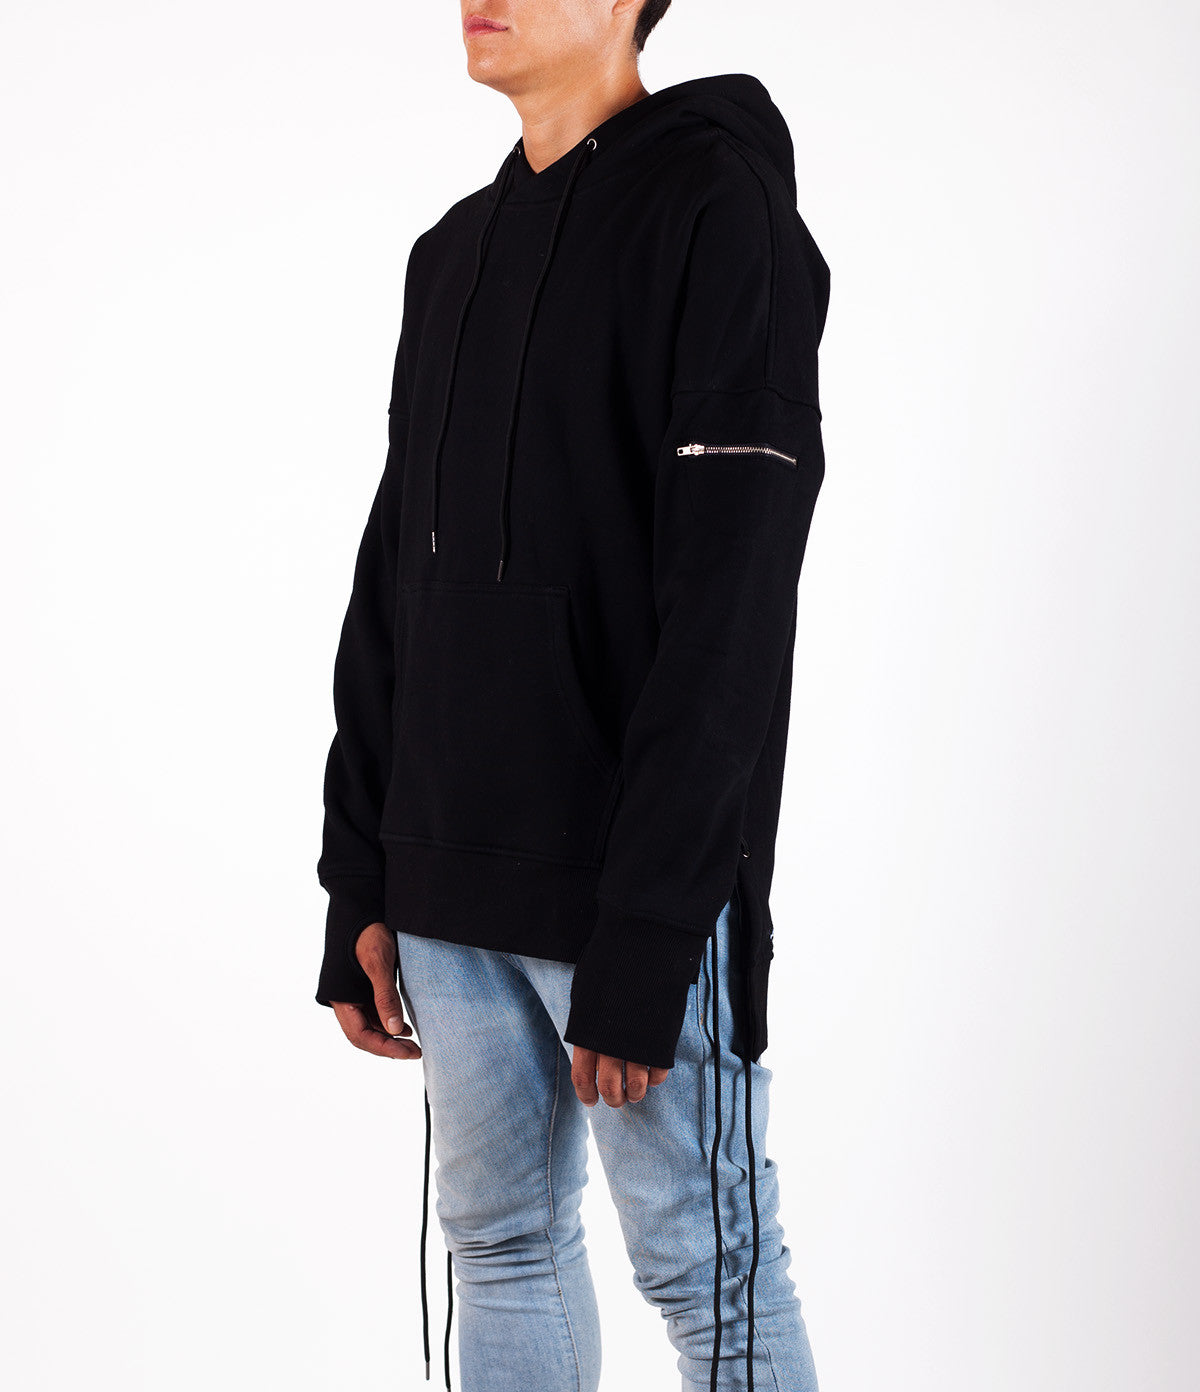 Extra Mile Black Lace-Up Hoodie